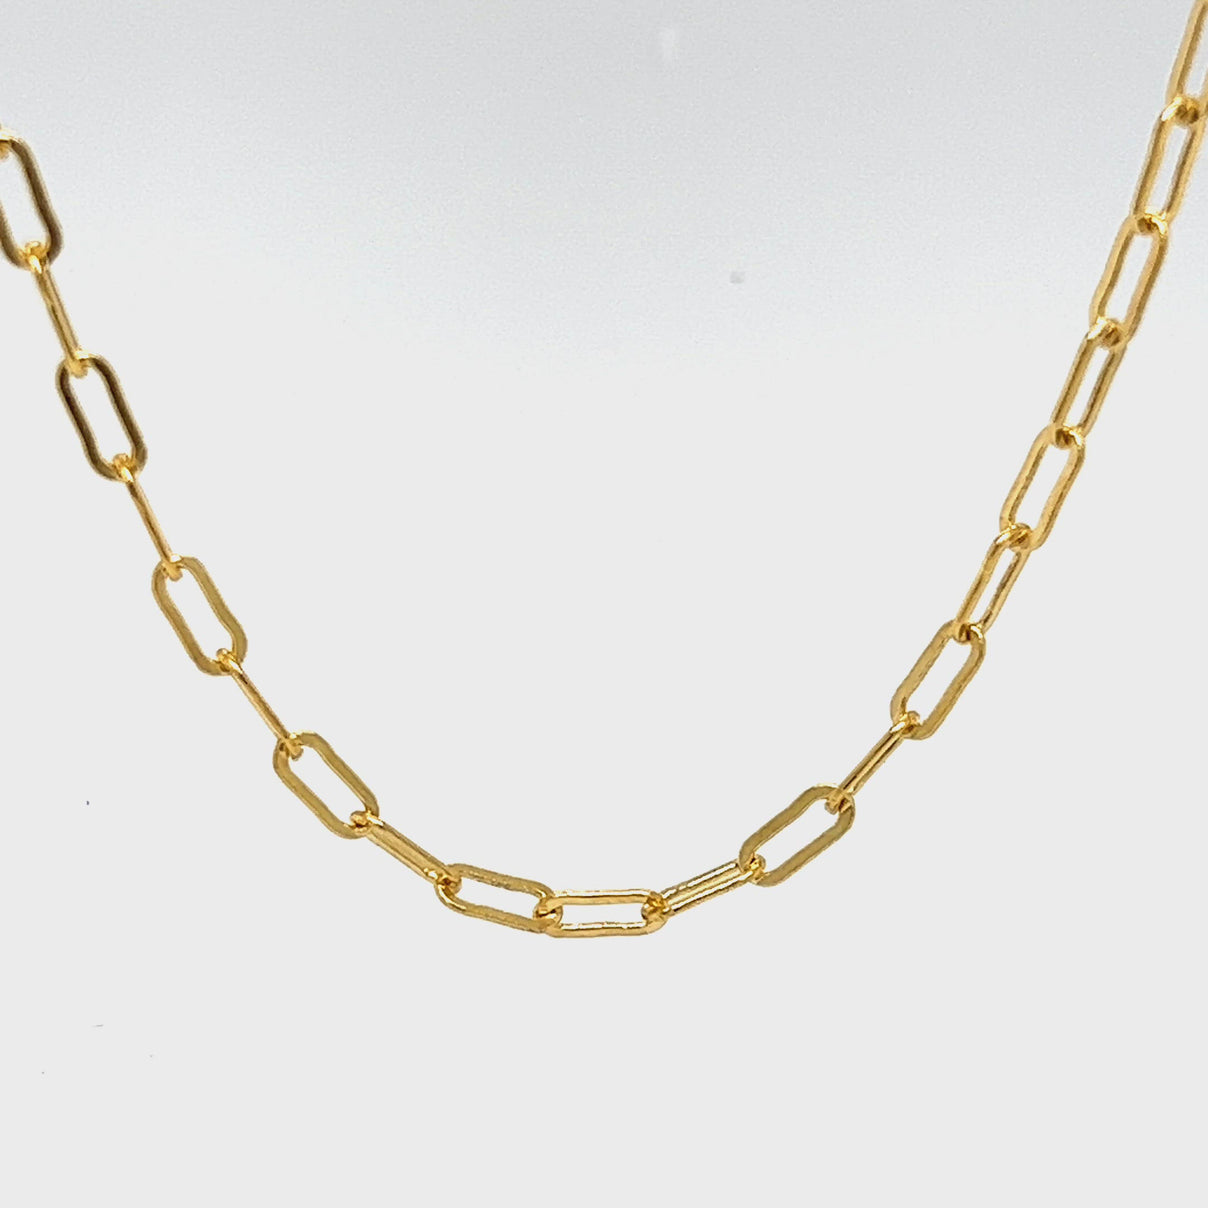 14/20 Yellow Gold-Filled 2.5mm Flat Drawn Oval Cable Chain 5ft – Pepetools